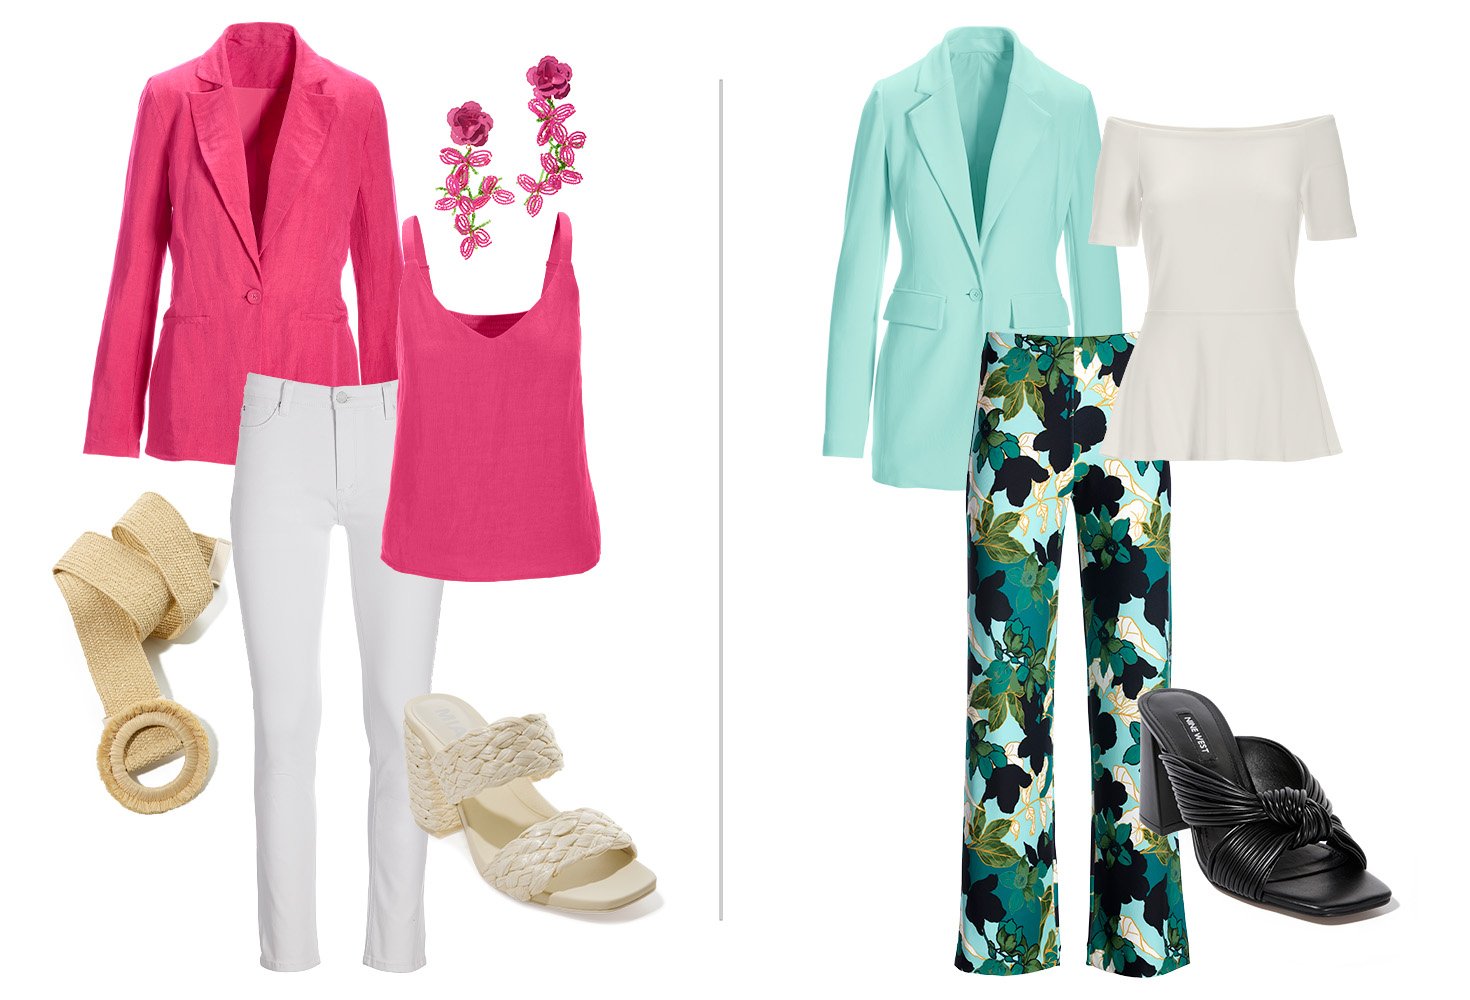 Left panel shows a pink linen blazer, pink linen tank top, tan raffia belt, white jeans, and white banded raffia heels. Right panel shows a light teal blazer, white off-the-shoulder peplum top, blue and green floral printed palazzo pants, and black knotted block heels.